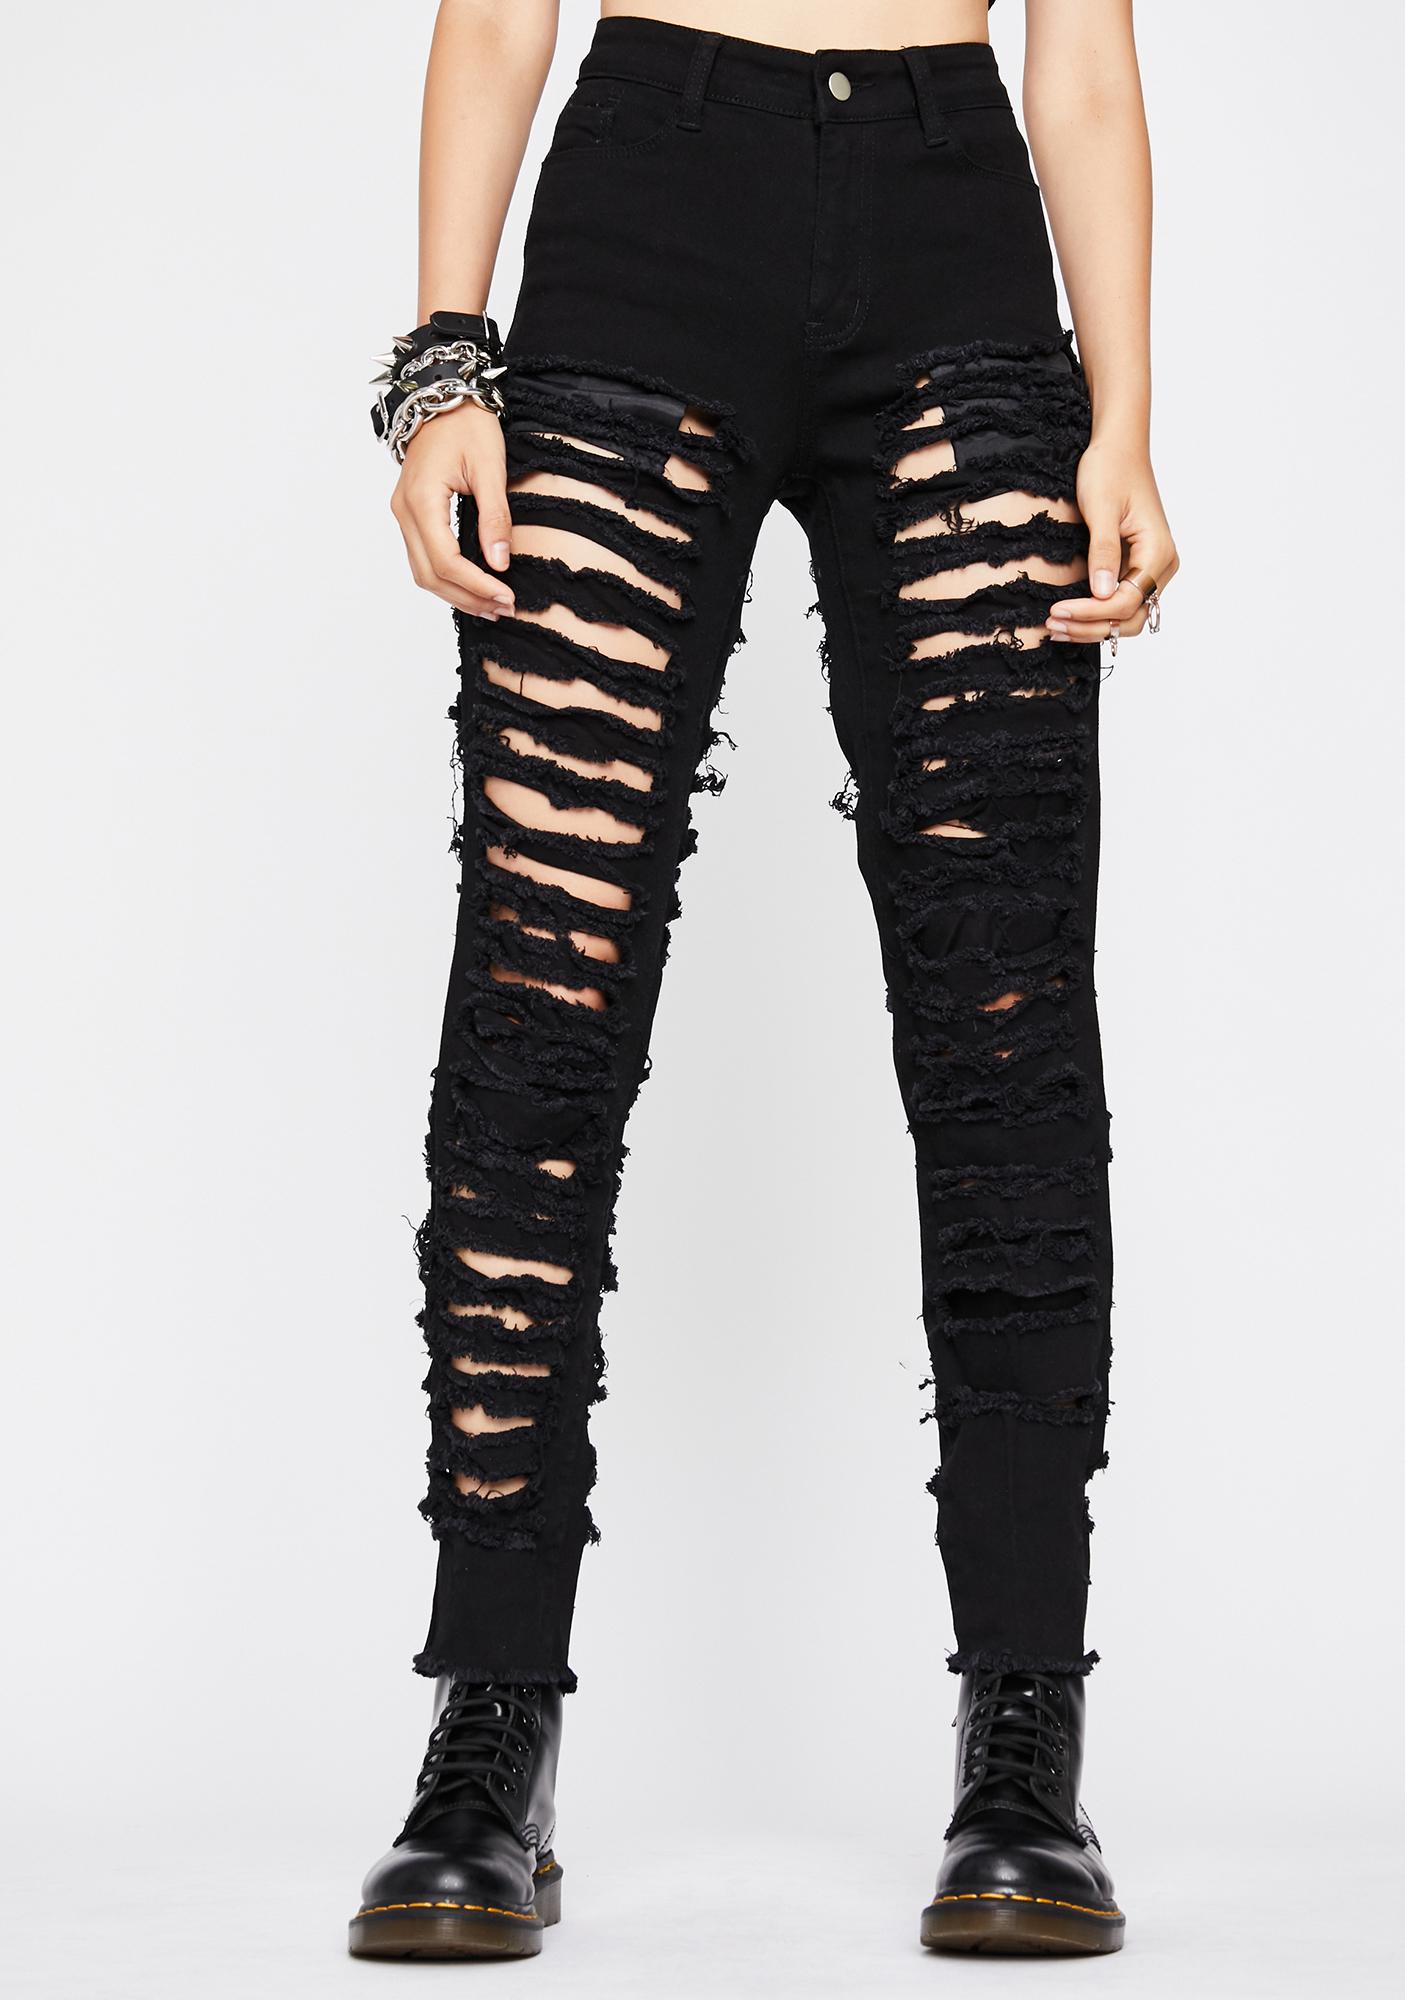 super distressed jeans front and back